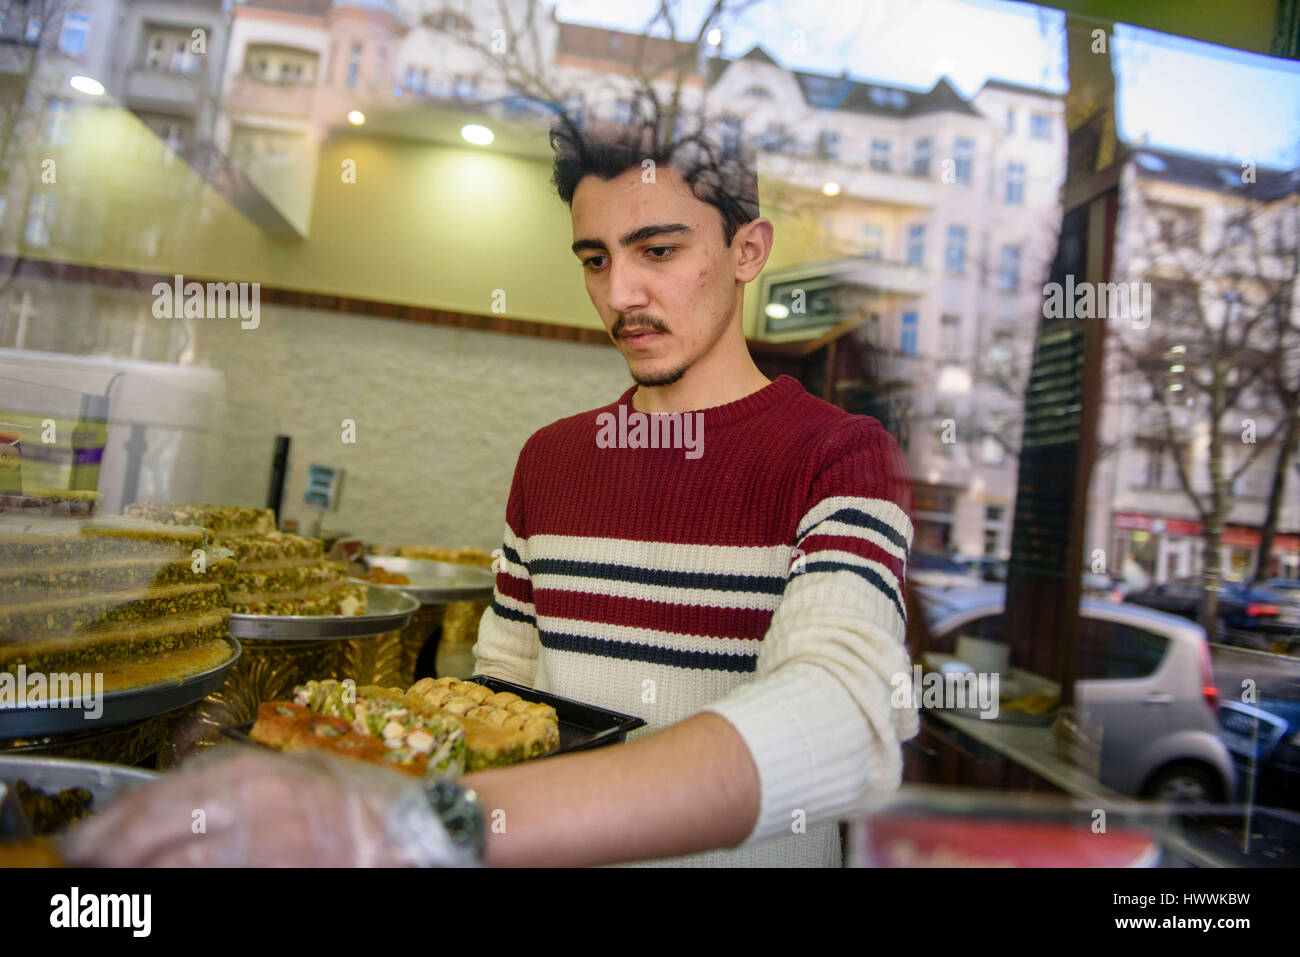 Berlin, Germany. 15th Mar, 2017. Sulaiman al-Sakka, employee and son of the family, puts together a present box with sweets at the confectionary Damaskus in Berlin, Germany, 15 March 2017. The al-Sakka family opened the Syrian confectionary in the district of Neukoelln in Berlin, three years after arriving in Germany. Photo: Gregor Fischer/dpa/Alamy Live News Stock Photo